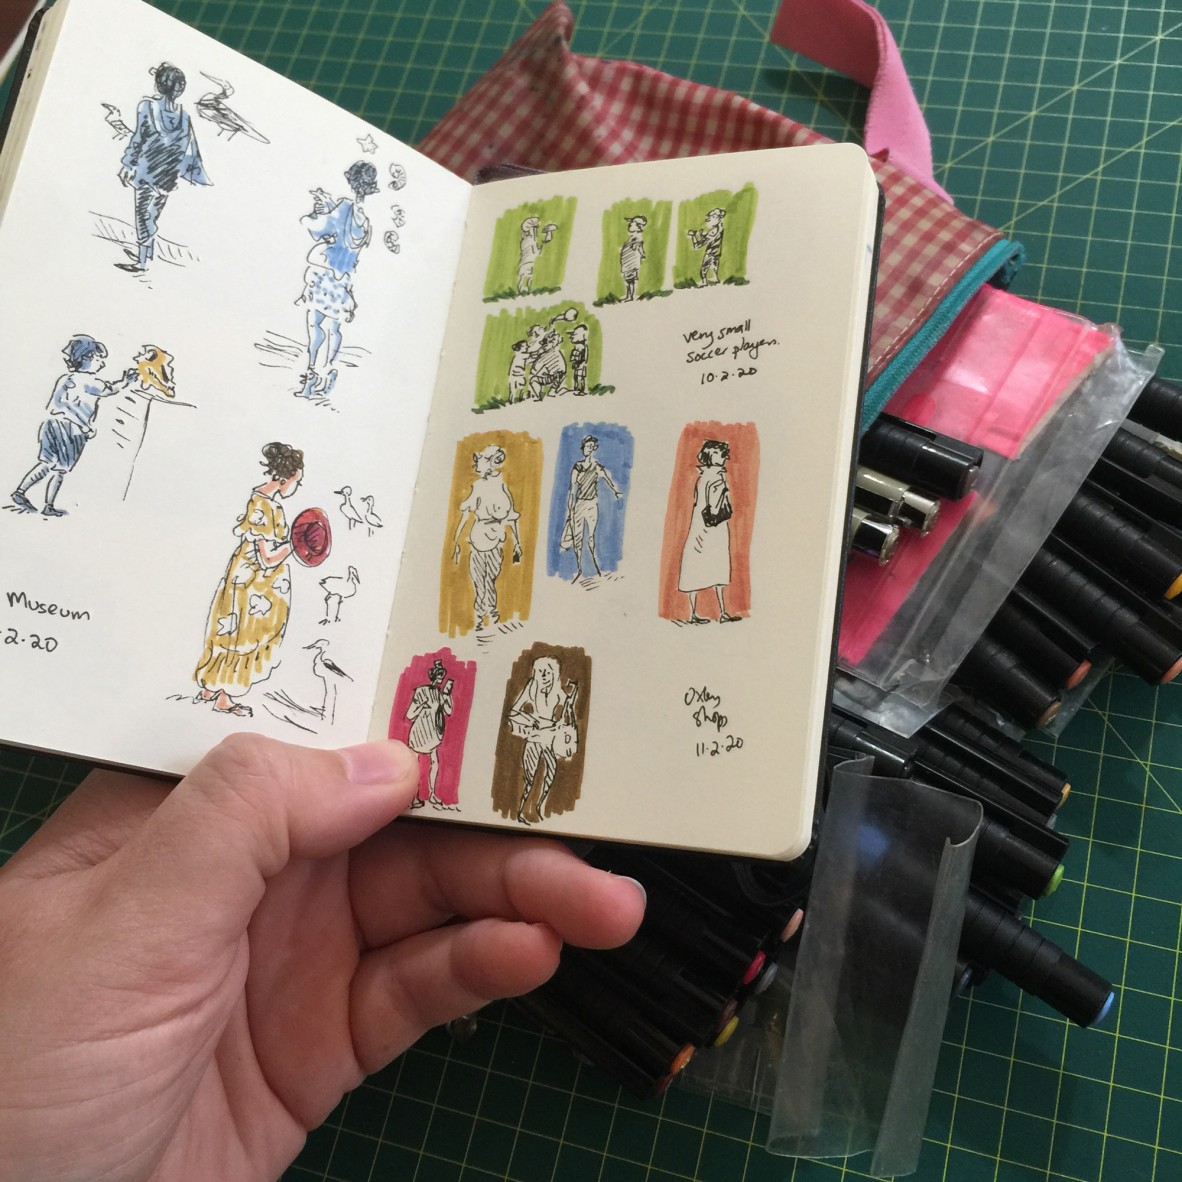 An open sketchbook held in front of a collection of illustrators pens